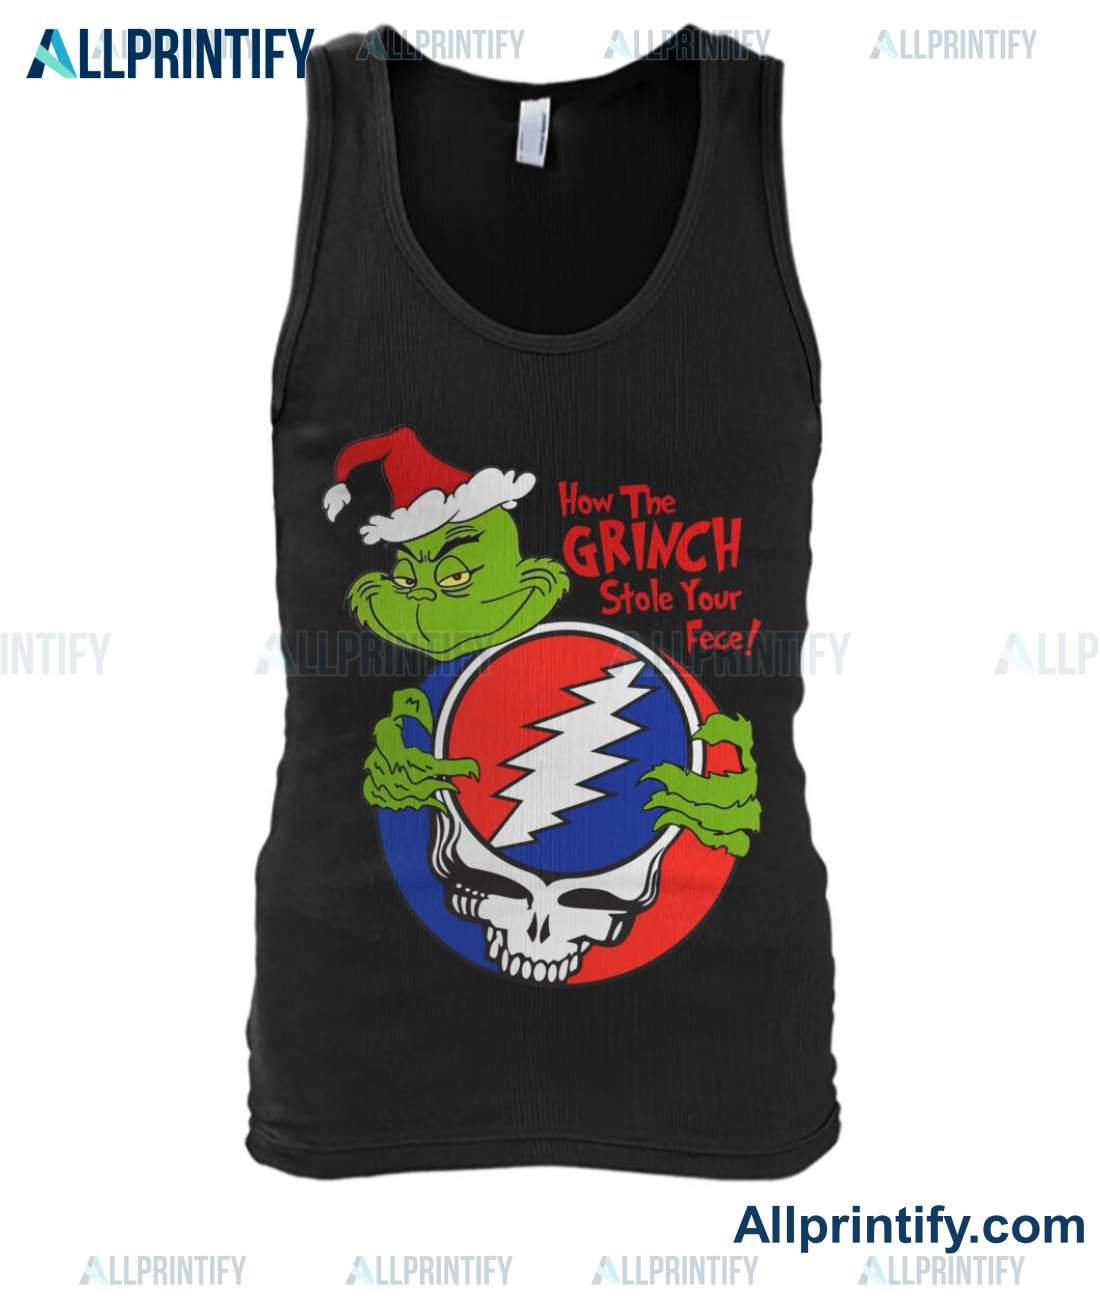 How The Grinch Stole Your Face Grateful Dead Shirt - Allprintify